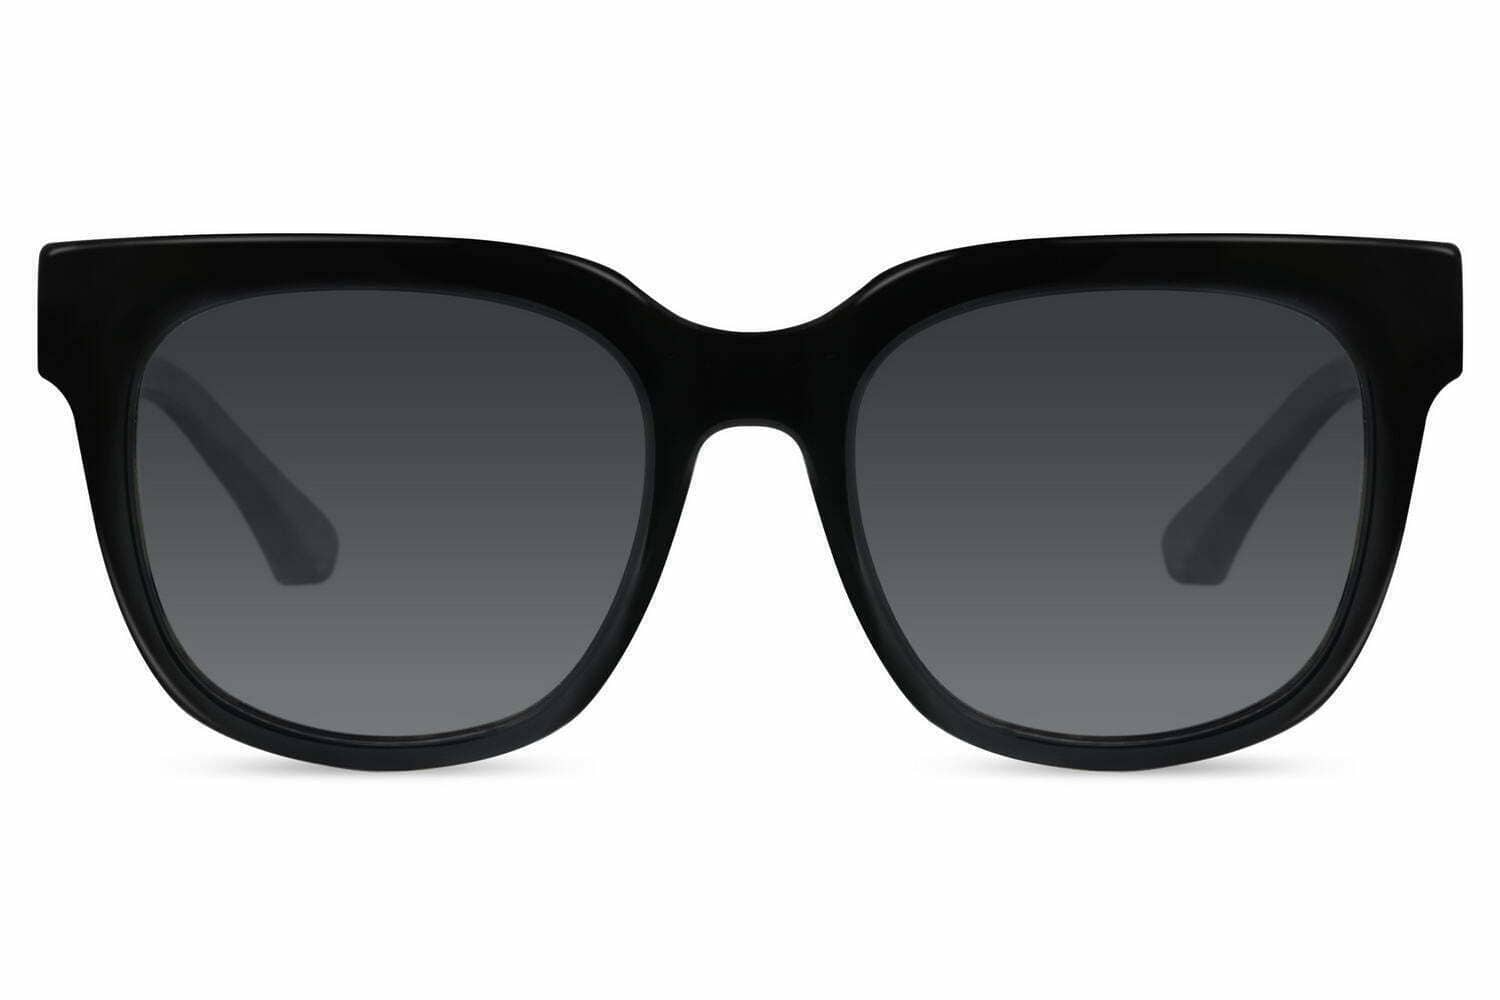 Irea sunglasses with Black color lens and Black color frame